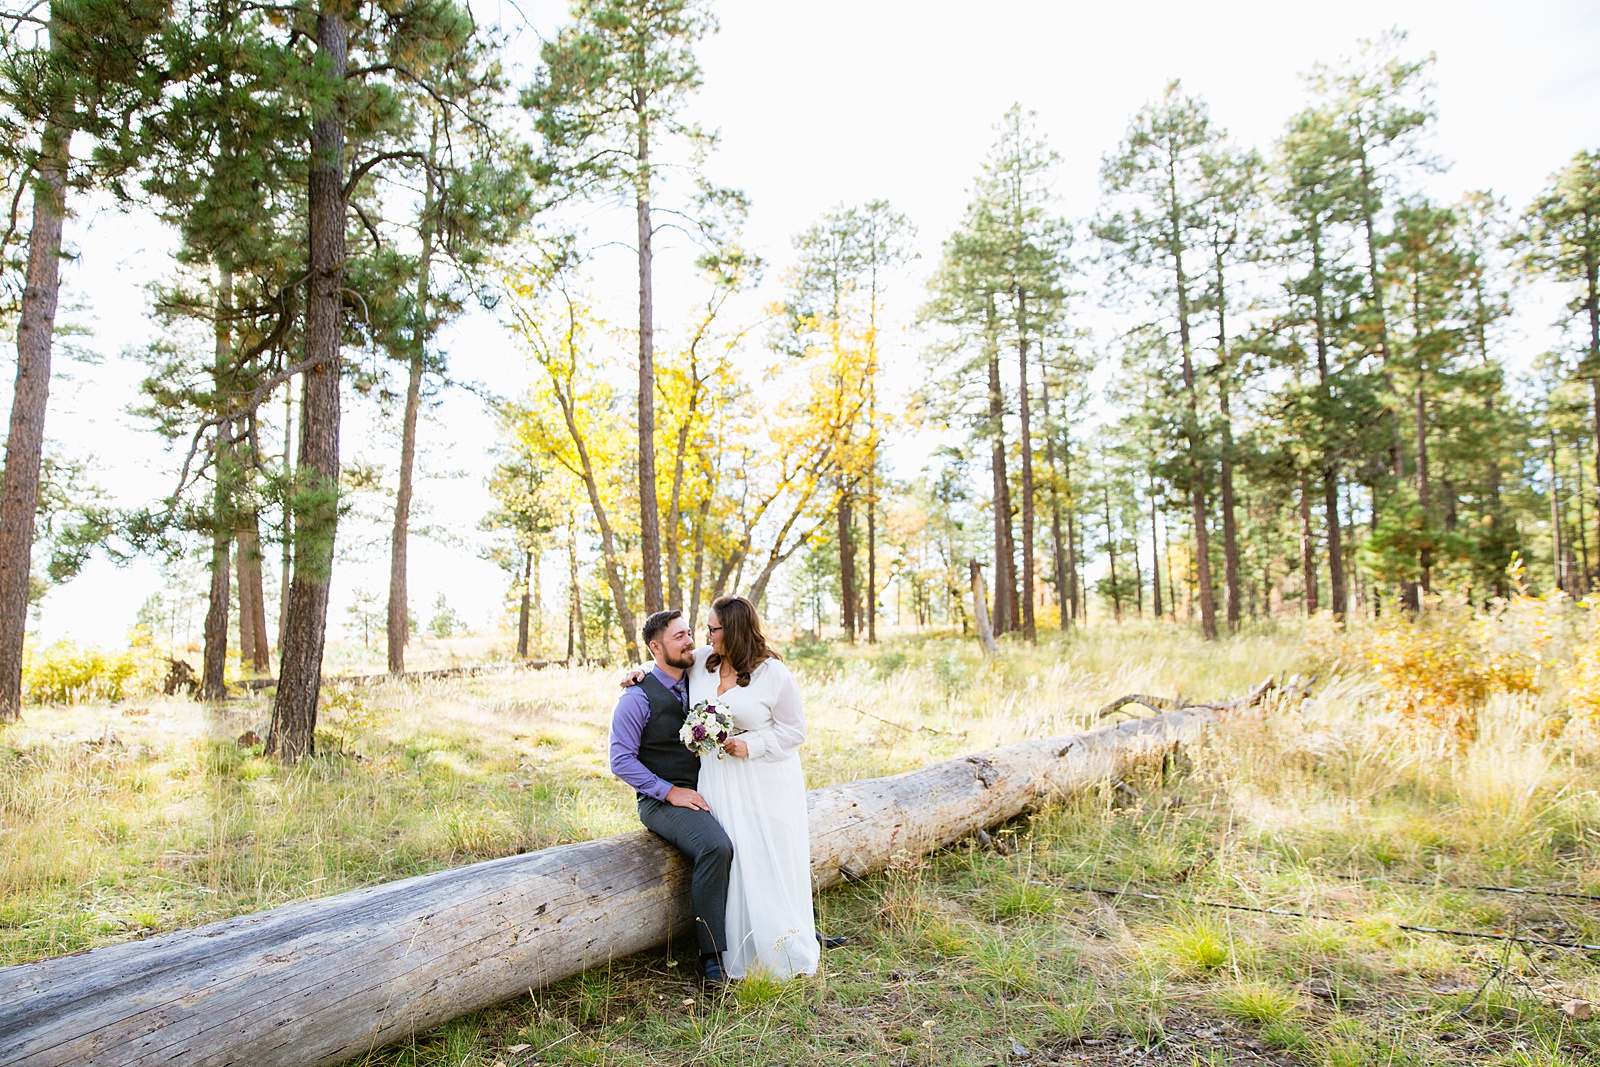 Bride and Groom share an intimate moment at their Mogollon Rim elopement by Arizona elopement photographer PMA Photography.